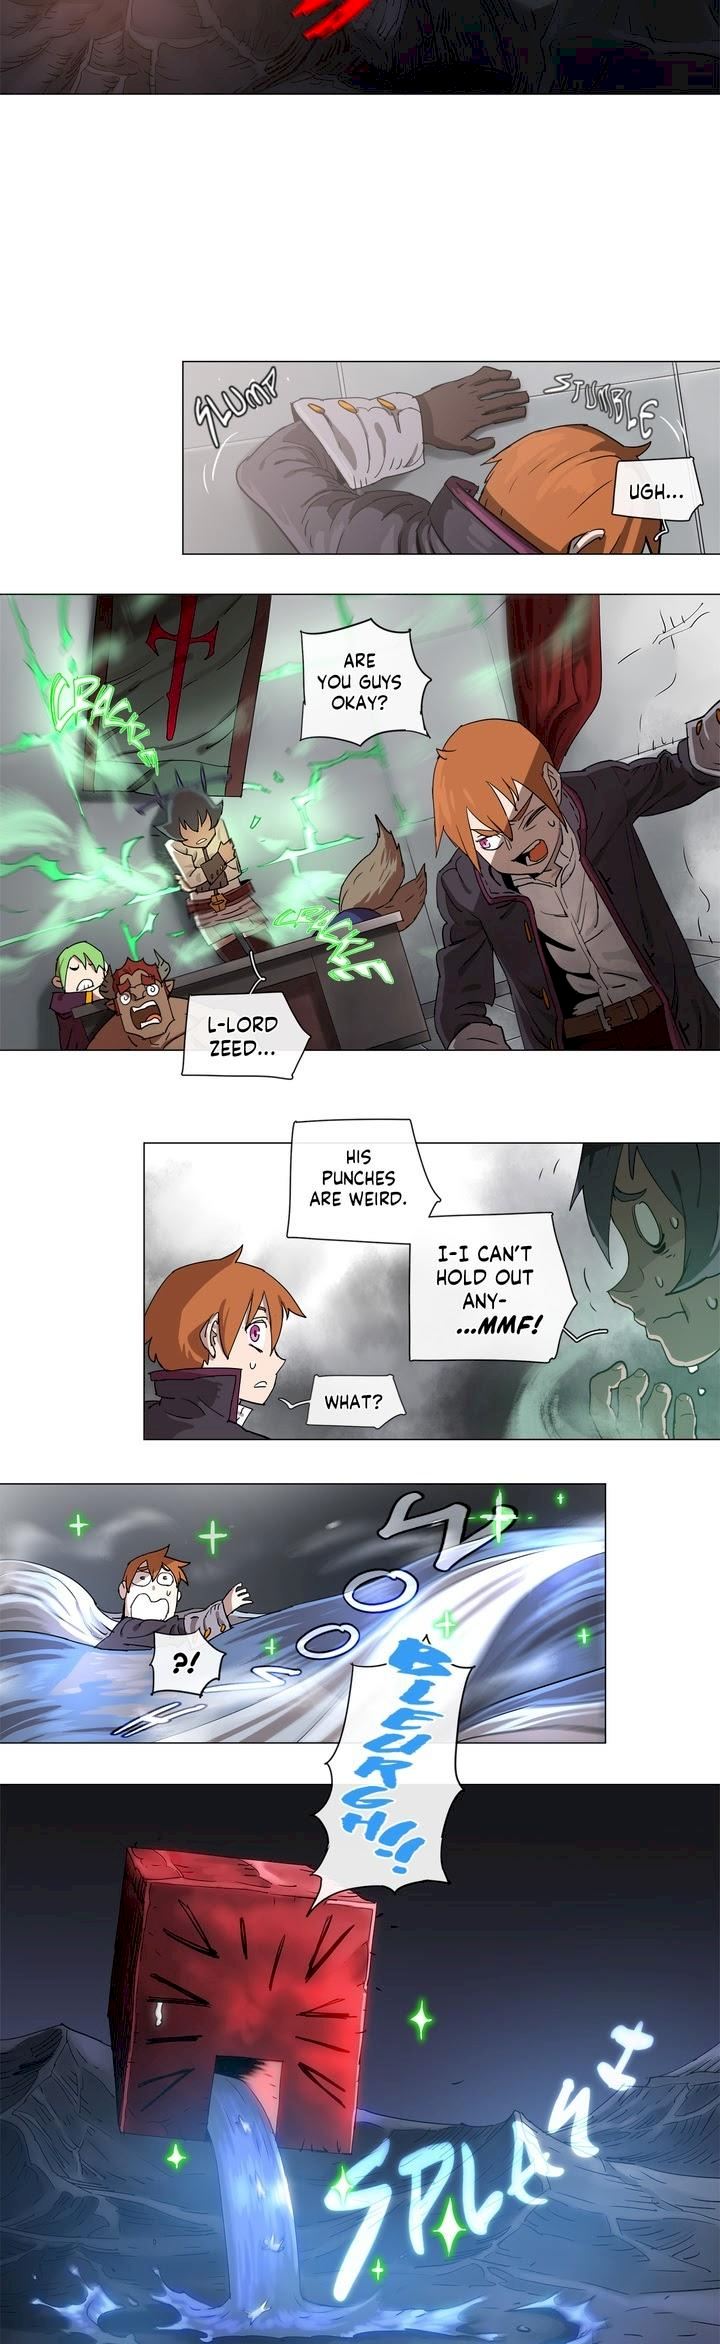 4 Cut Hero - Chapter 112 Page 6